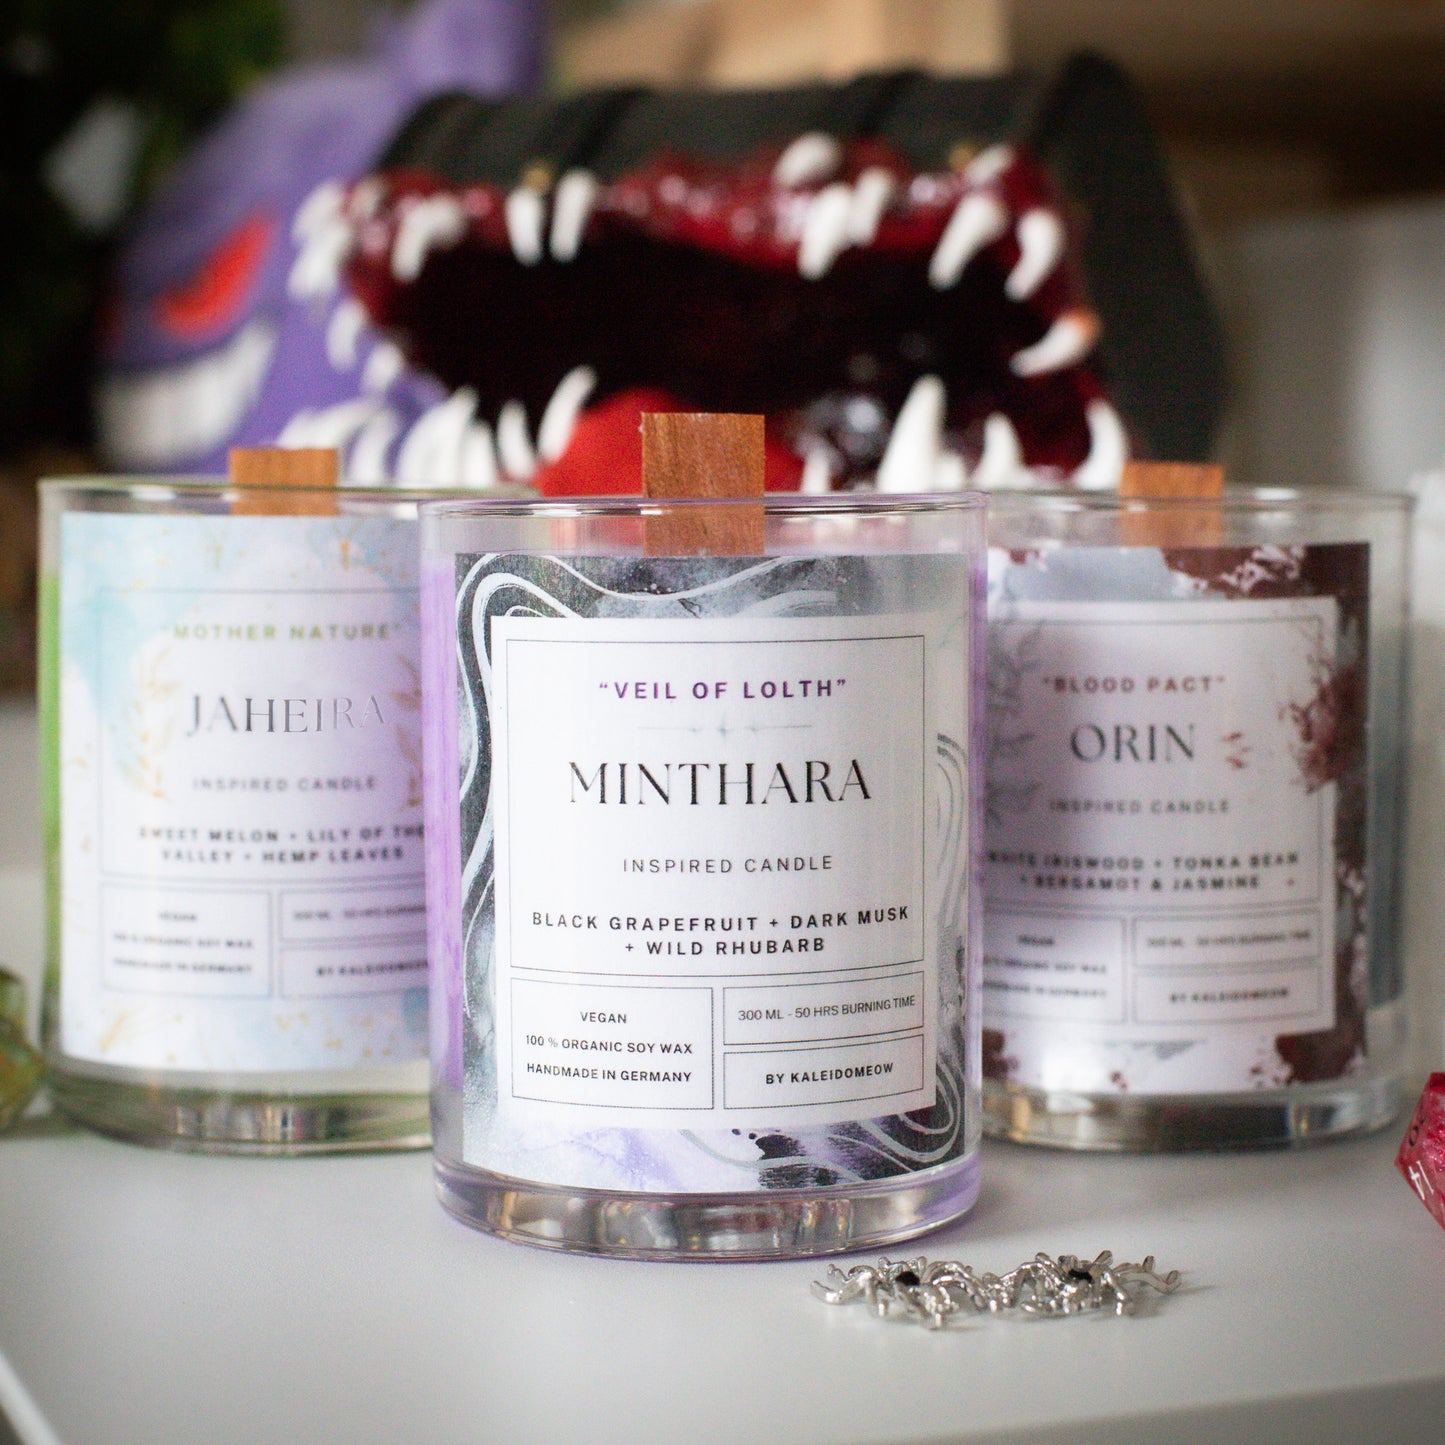 Jaheira inspired candle - 'Mother Nature' Baldurs Gate 3 inspired soy Candles 300 ML